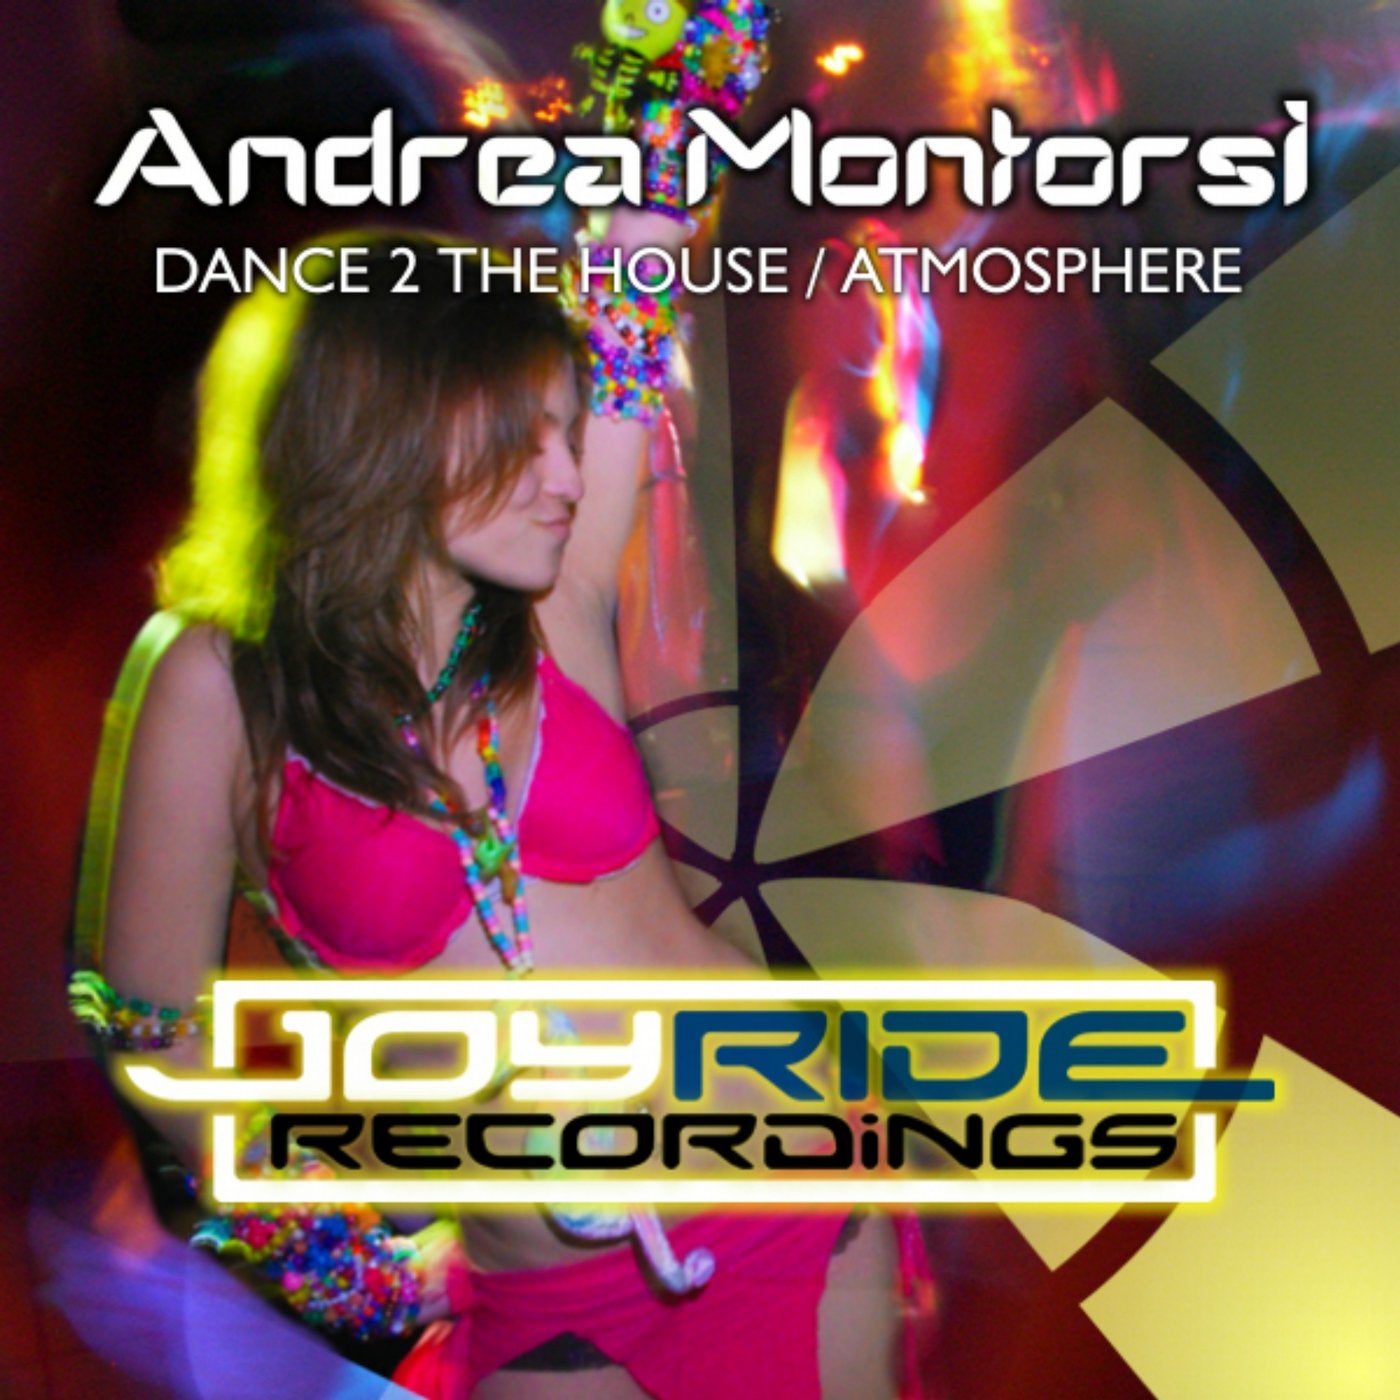 Dance 2 the House / Atmosphere